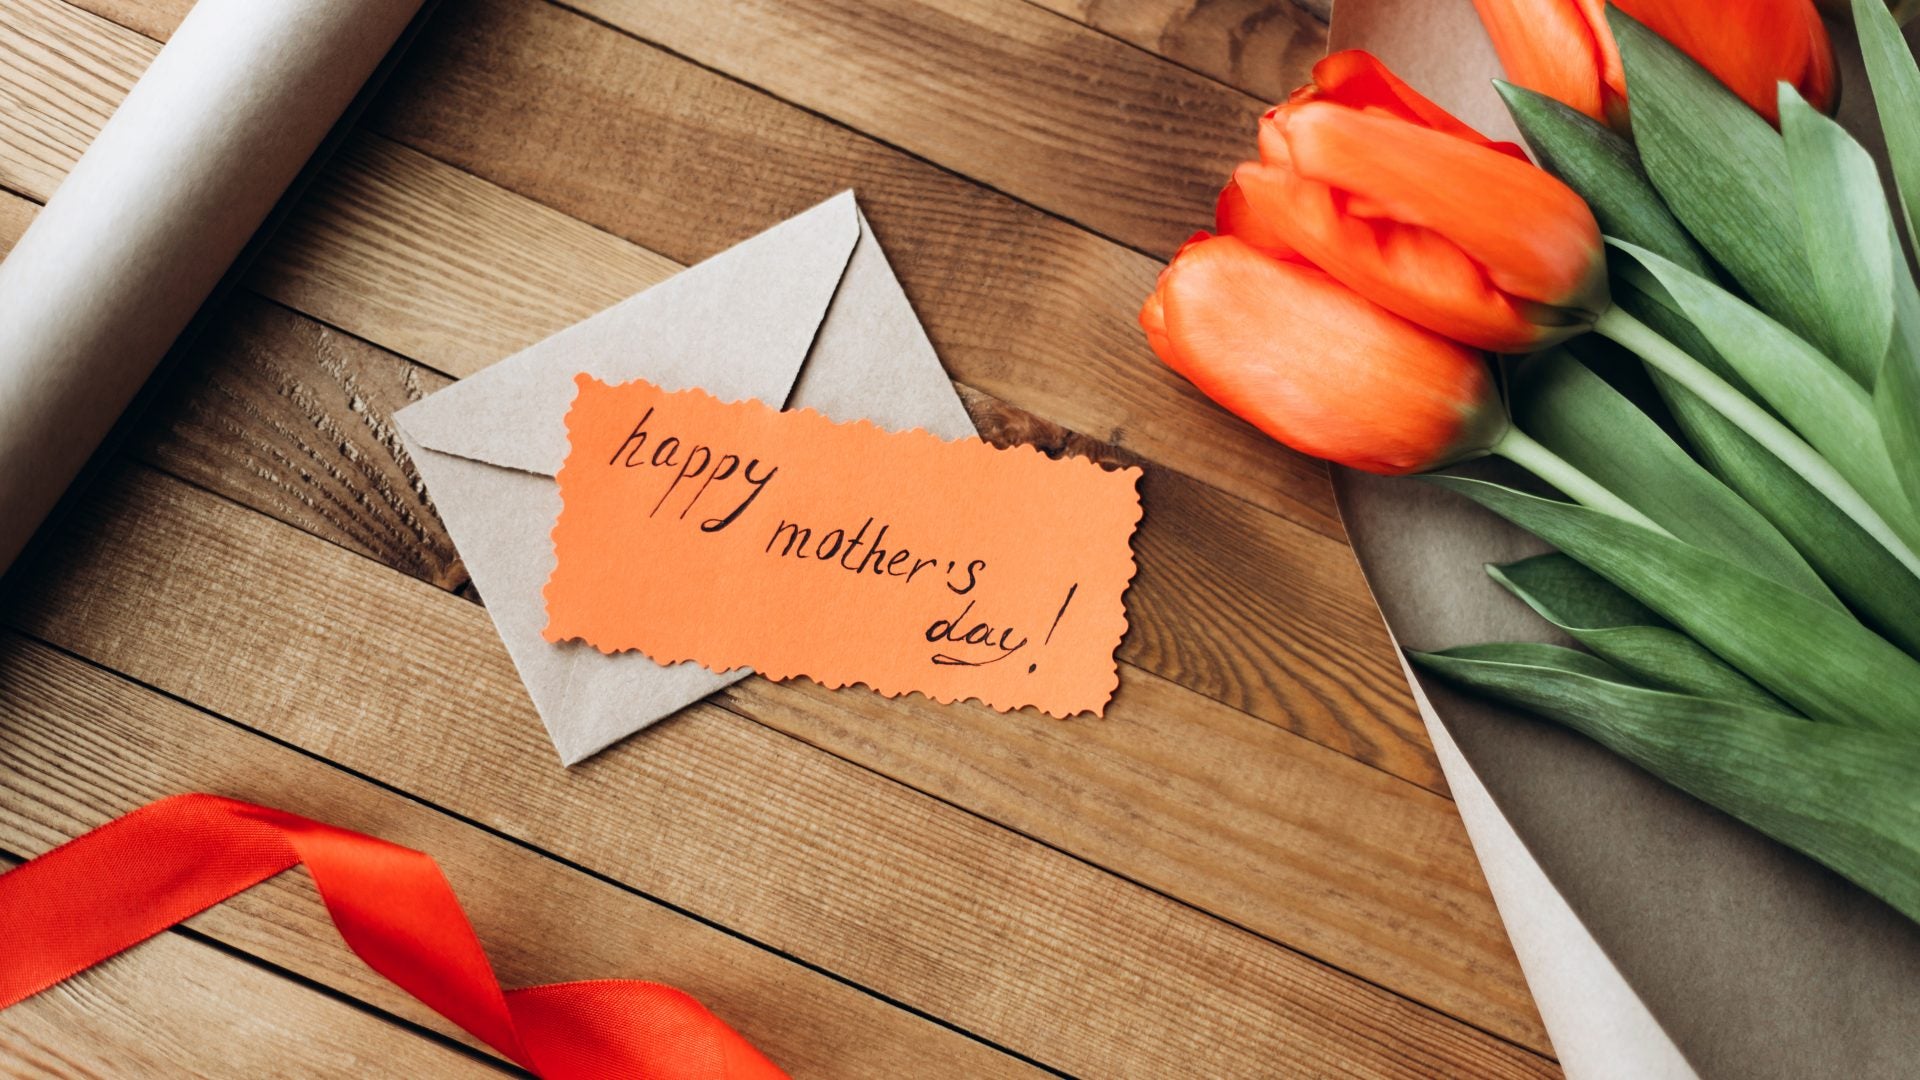 10 Last-Minute Mother’s Day Gifts From Amazon